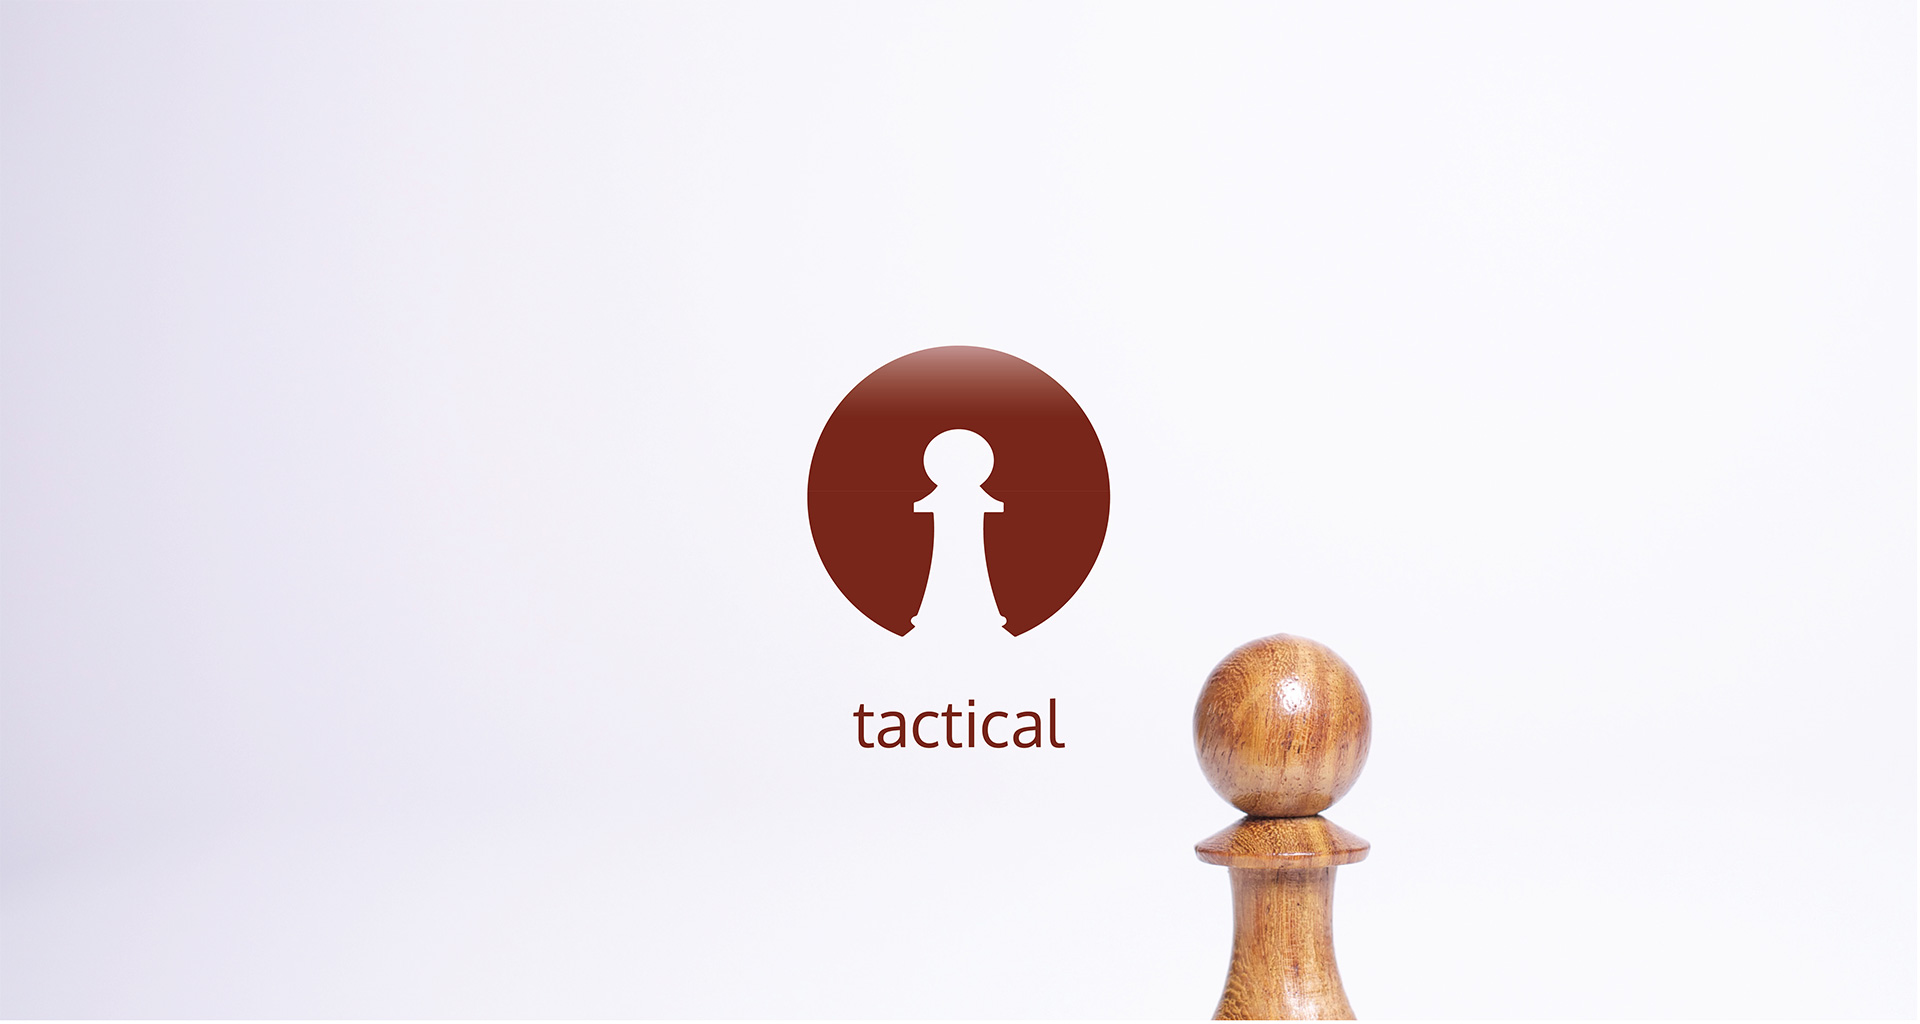 Tactical icon and bishop chess piece